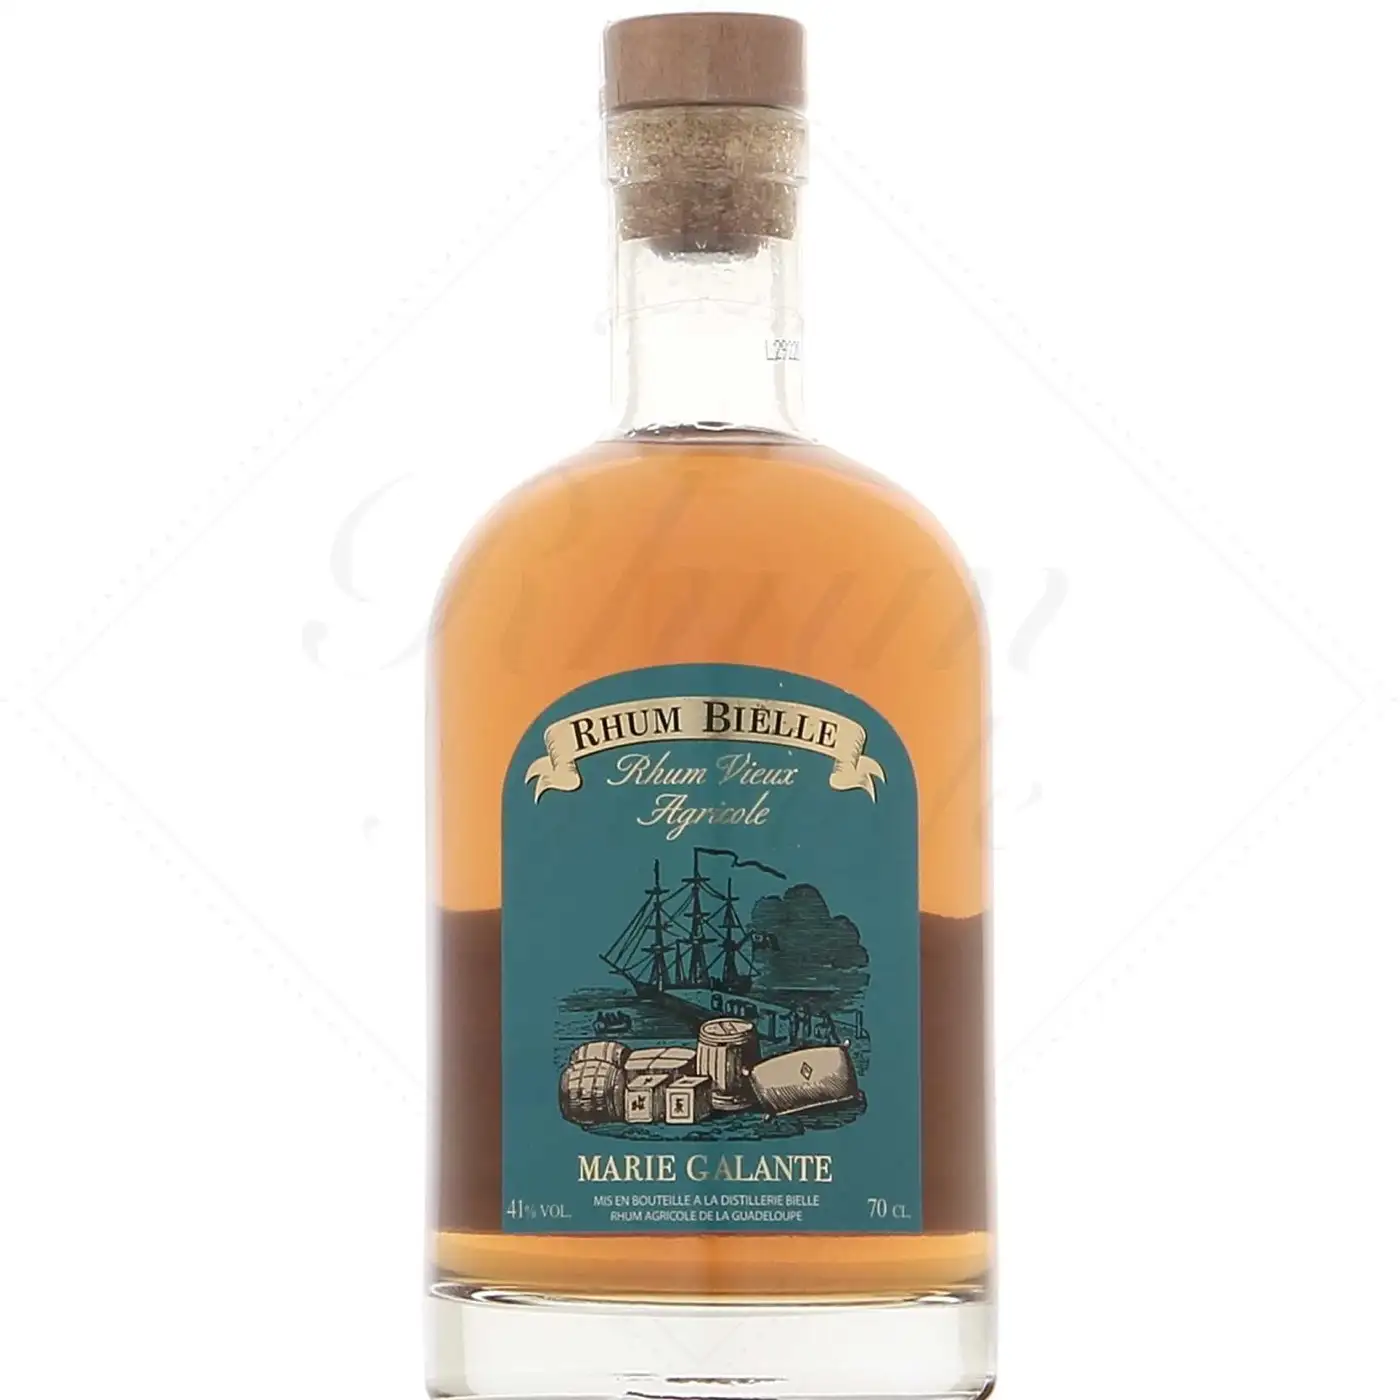 Image of the front of the bottle of the rum Rhum Vieux Agricole